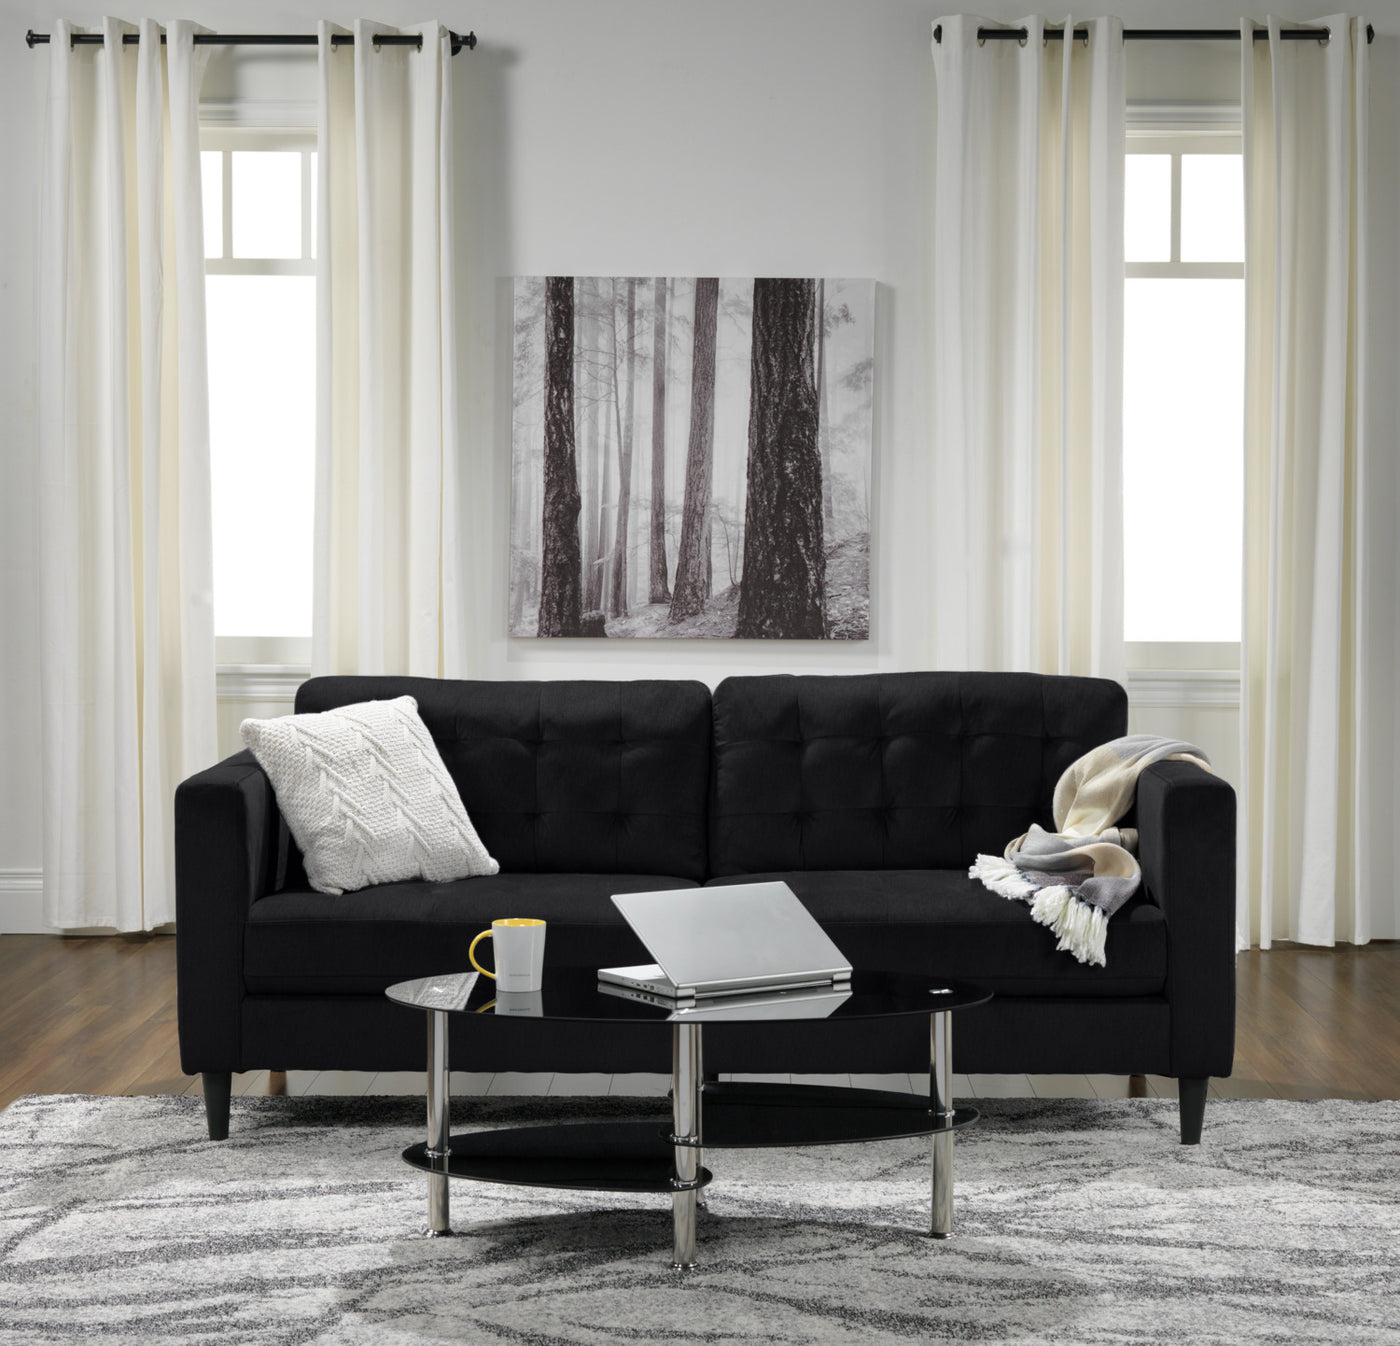 Anthena Sofa and Loveseat Set - Charcoal